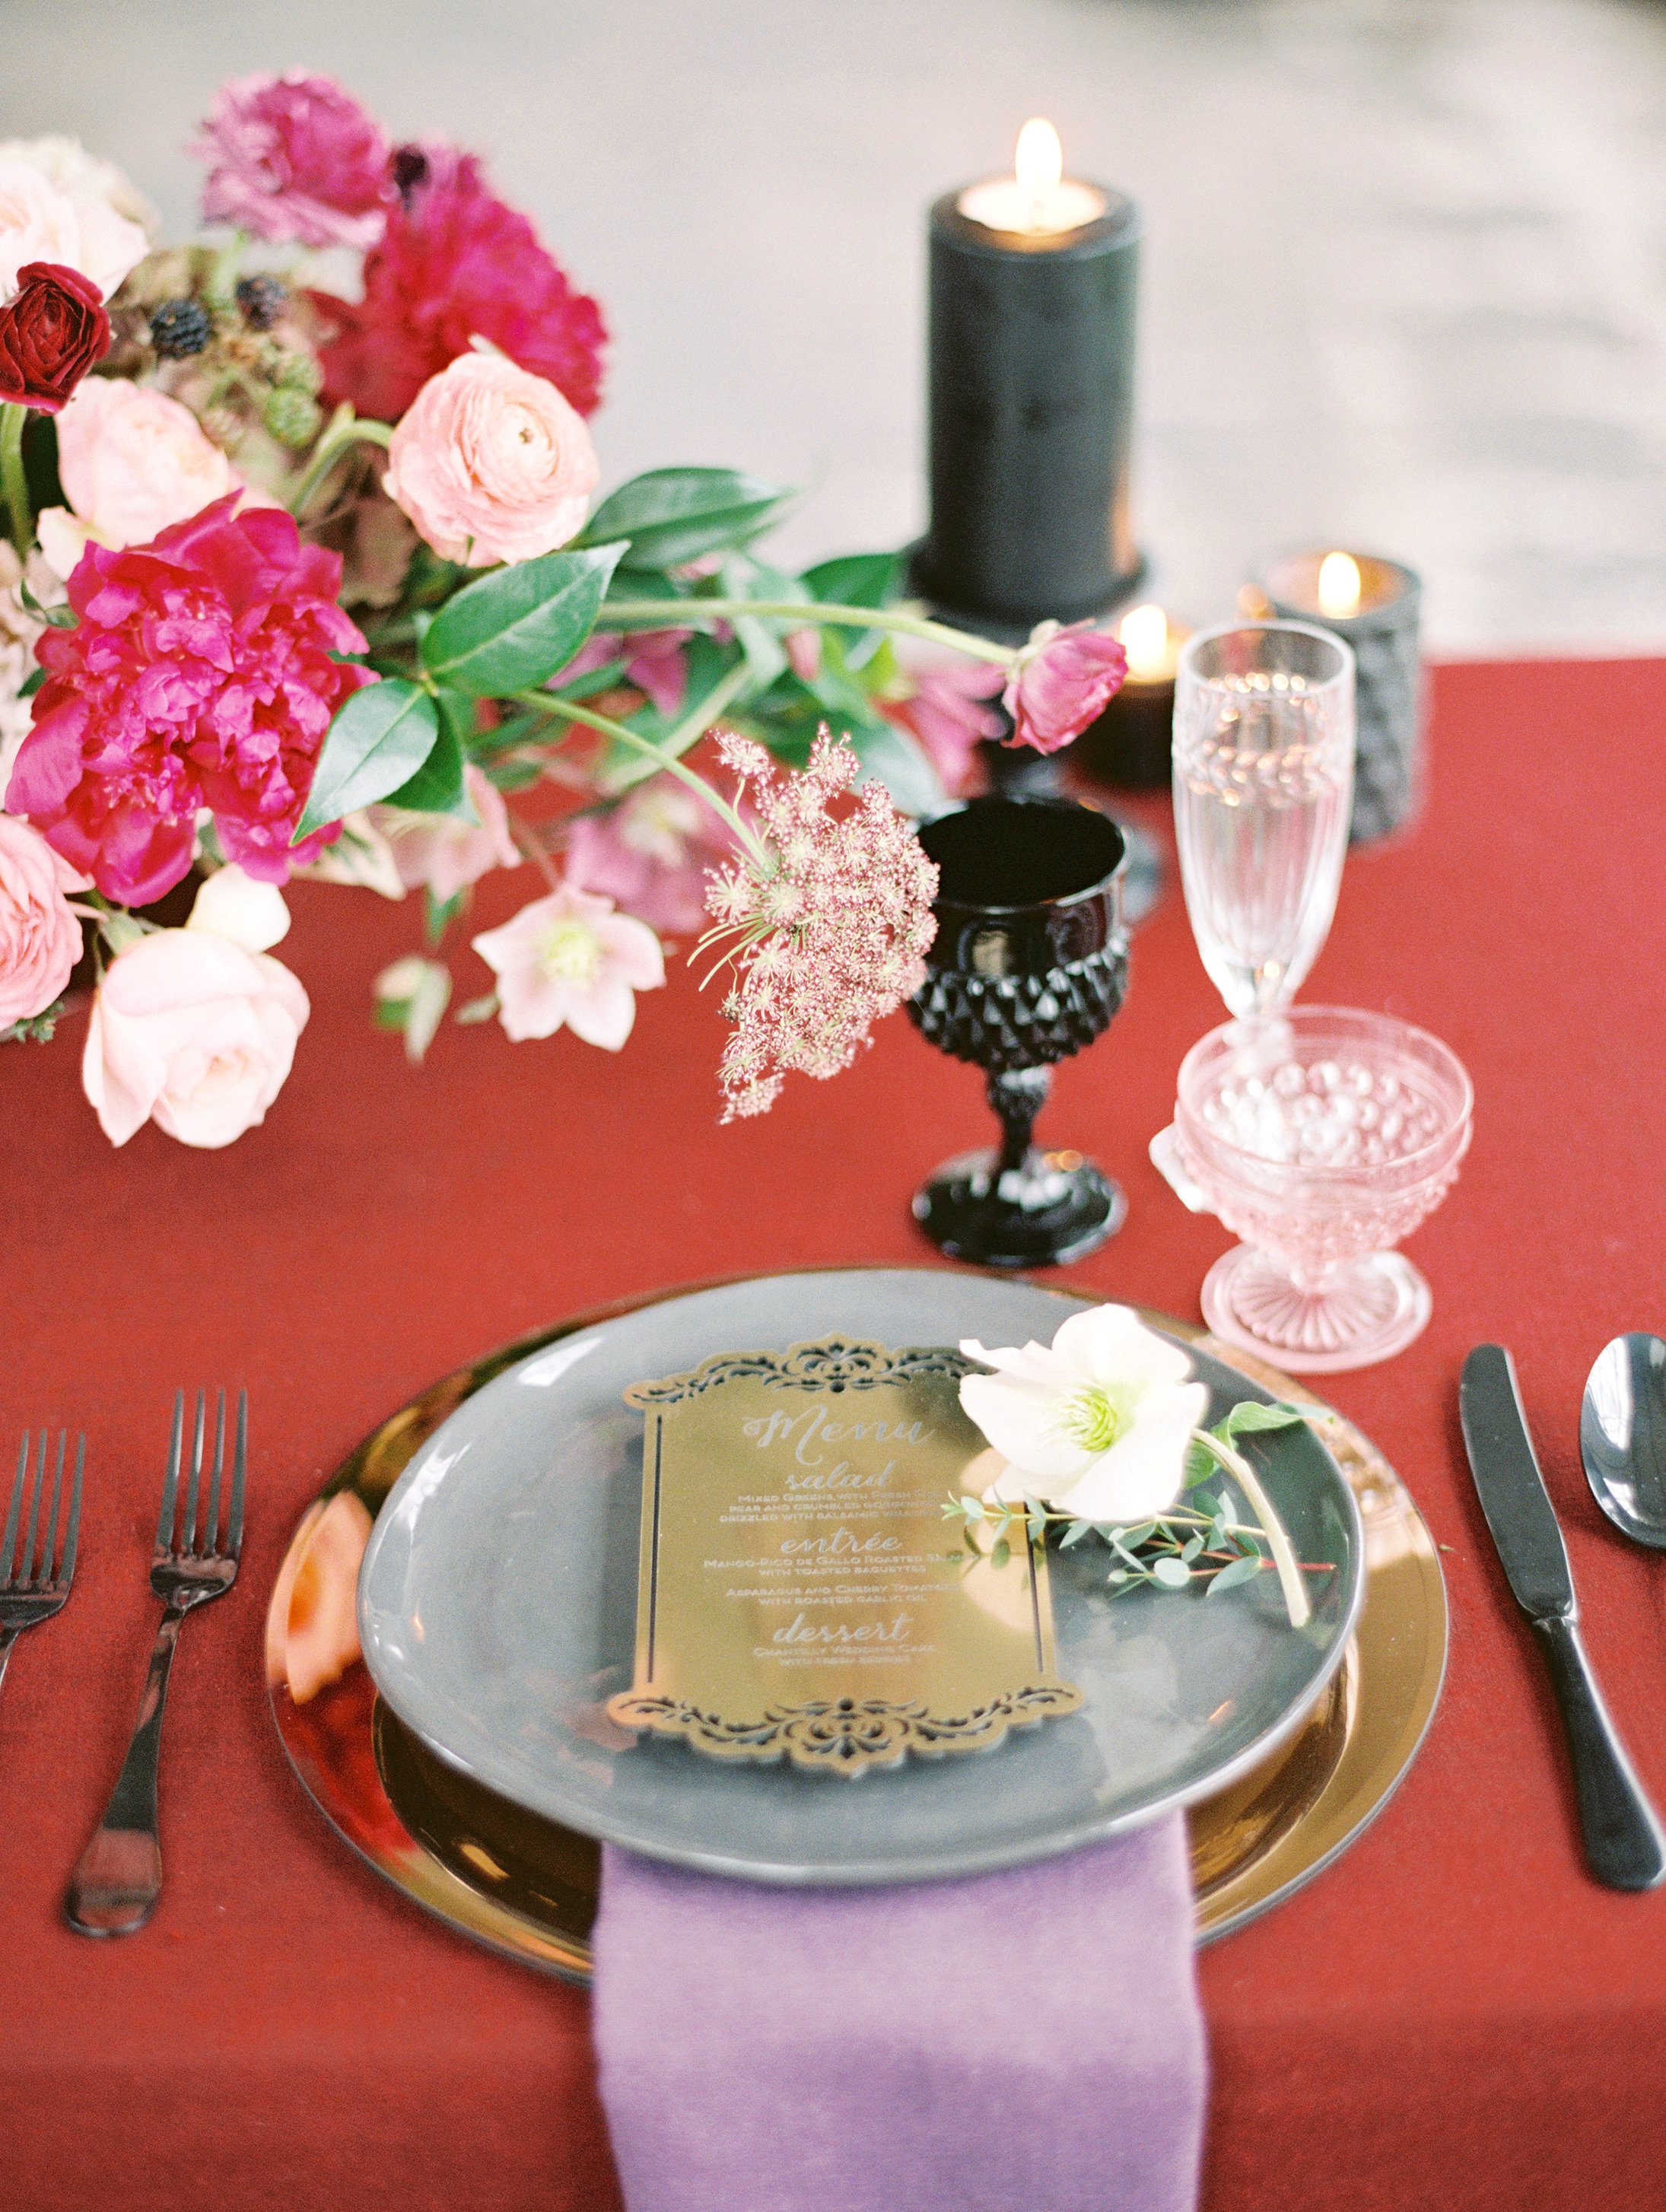 Marsala themed place setting at sweetheart table